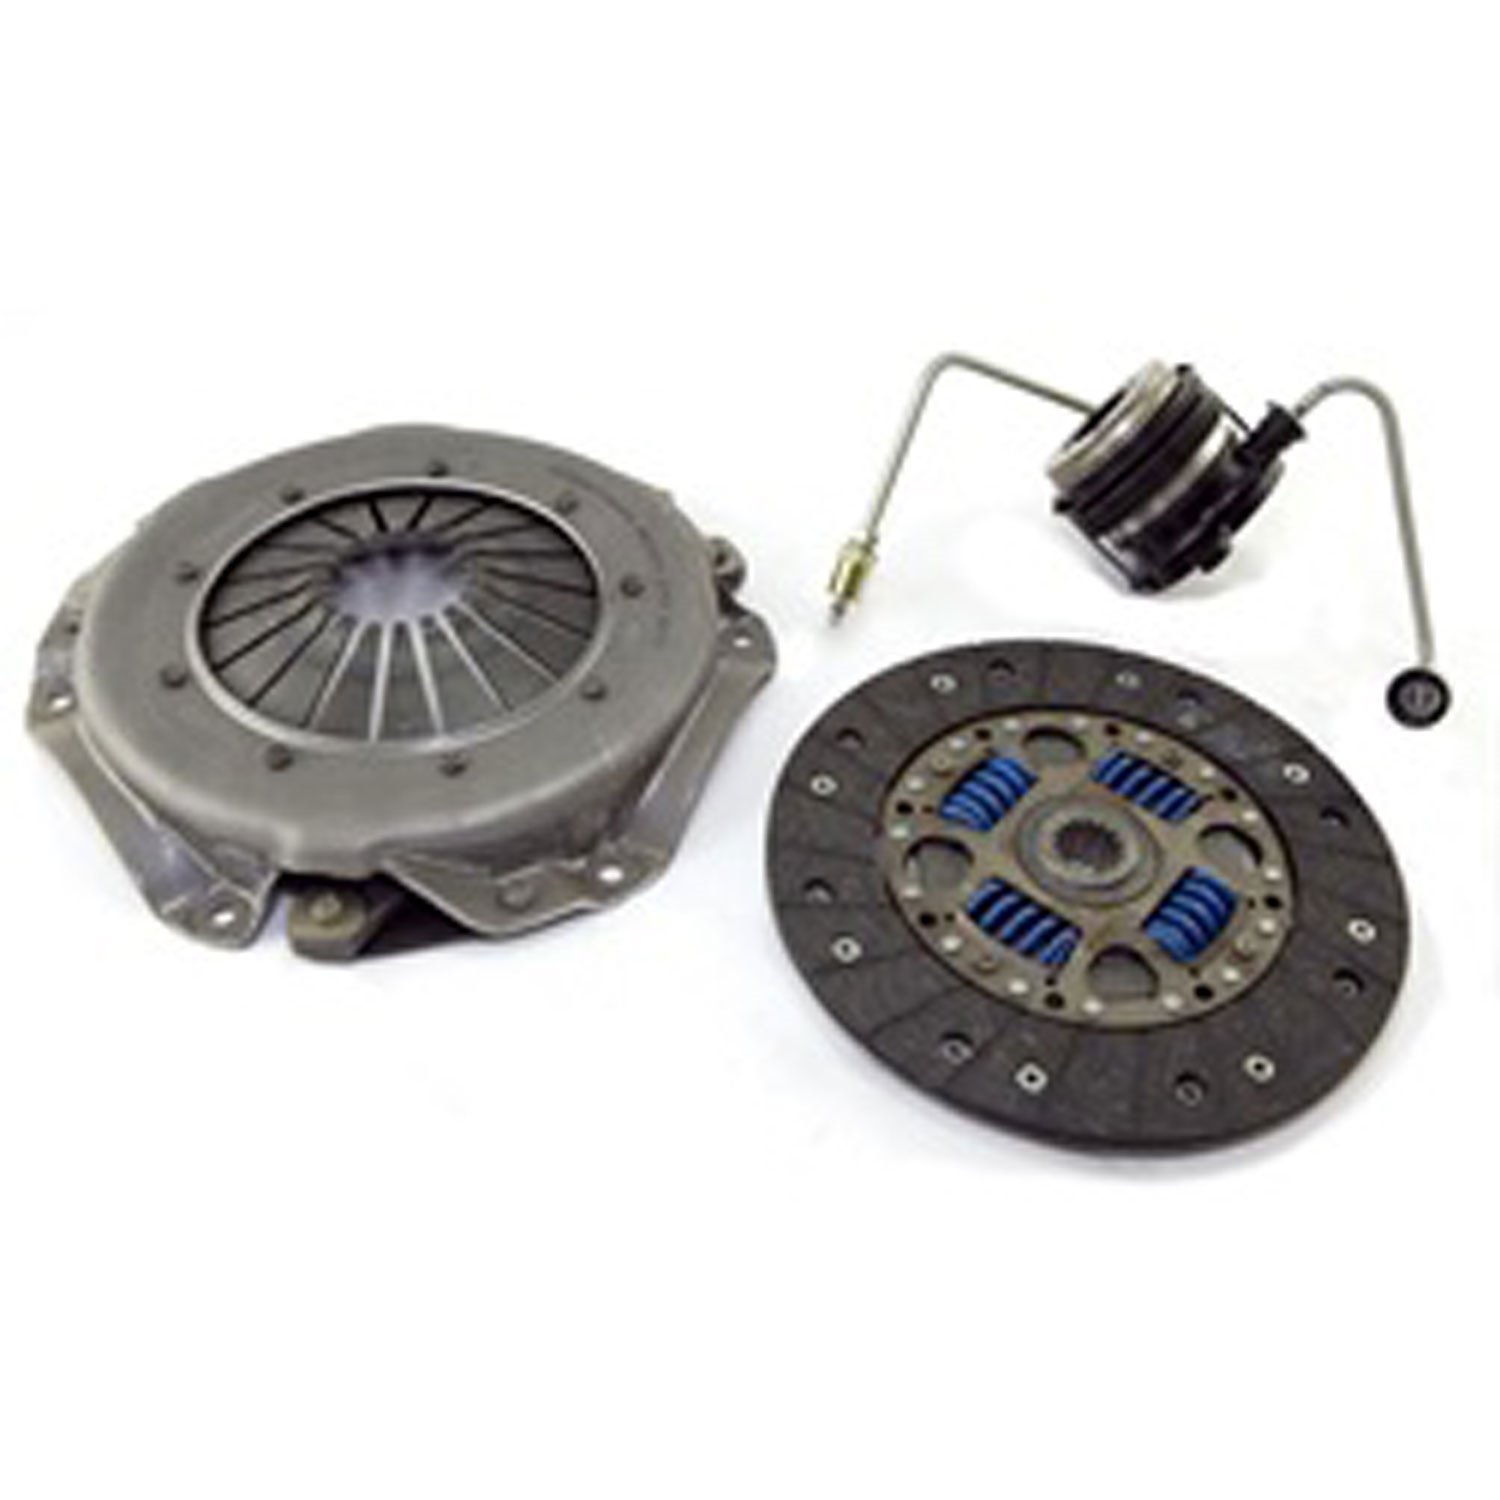 Replacement clutch kit from Omix-ADA, Fits 91-92 Jeep Wrangler YJ with 4-cylinder engines.